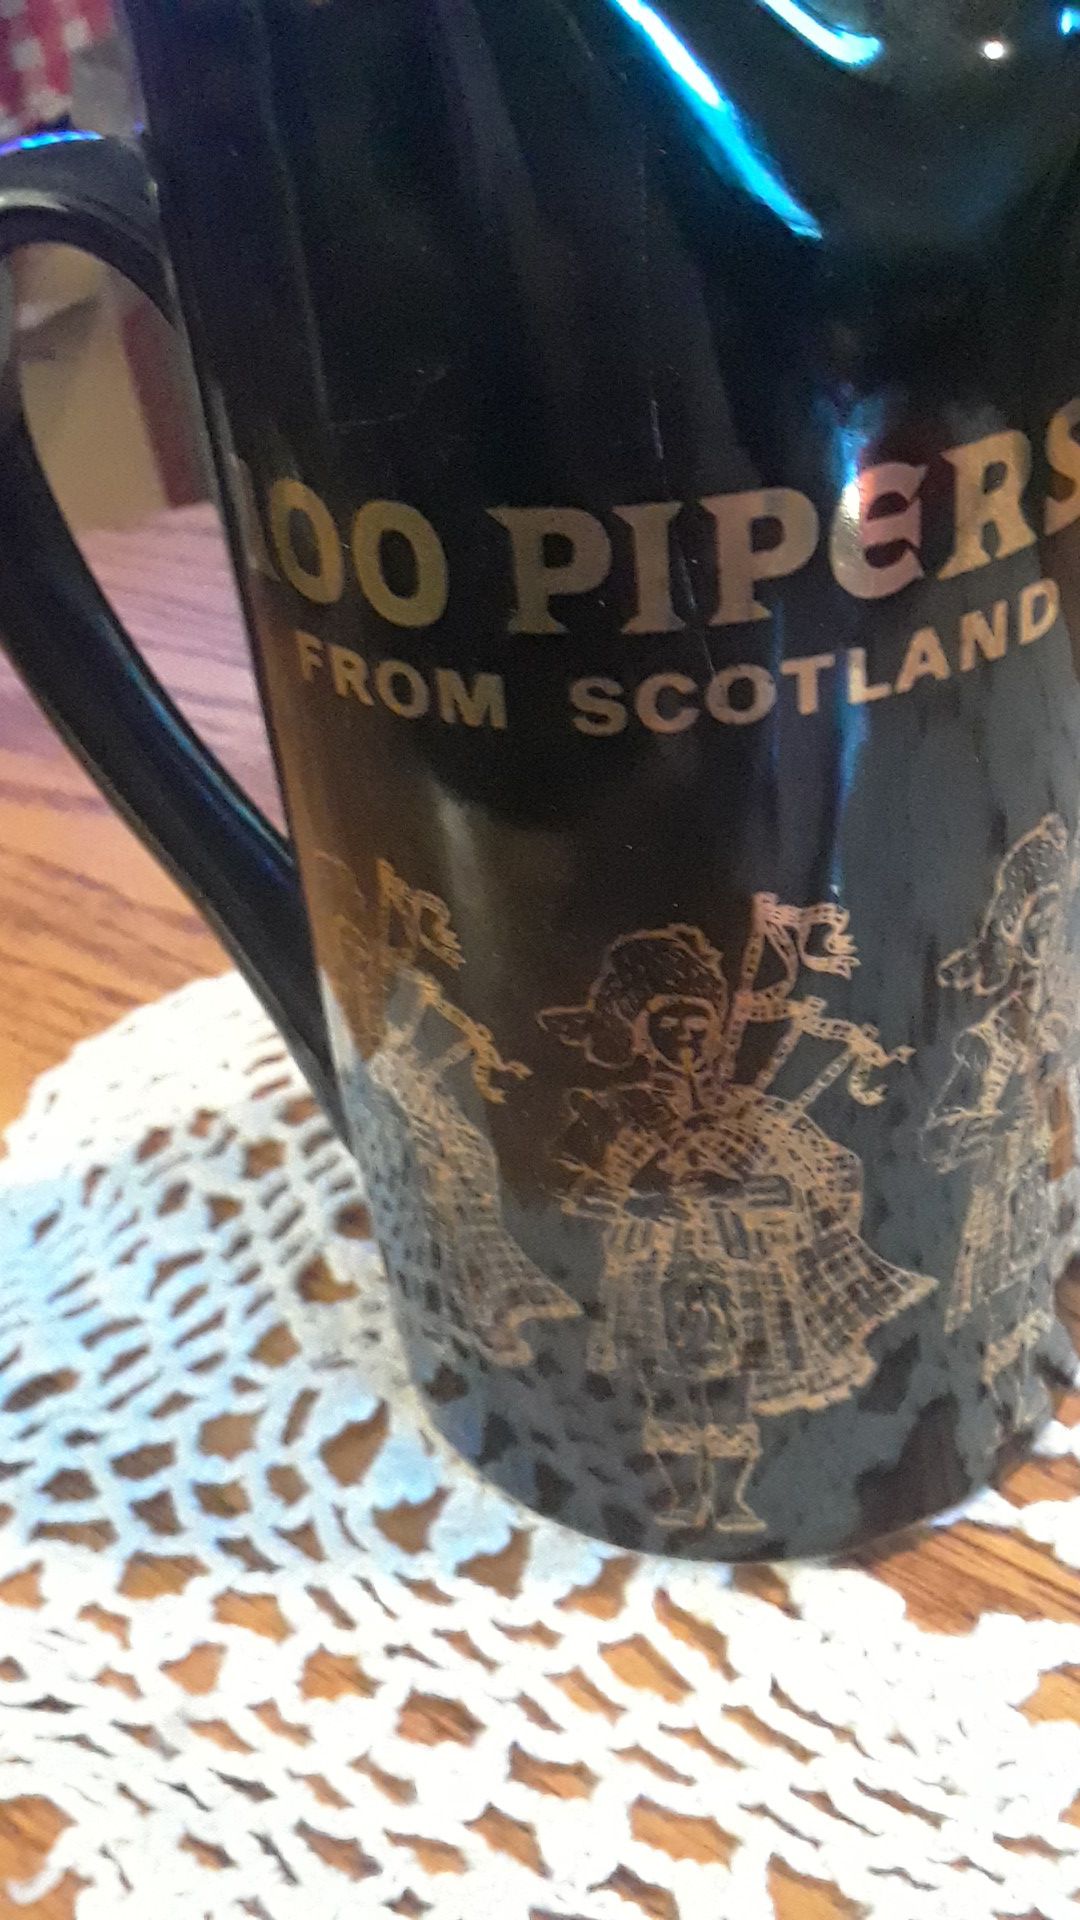 100 pipers from scotland